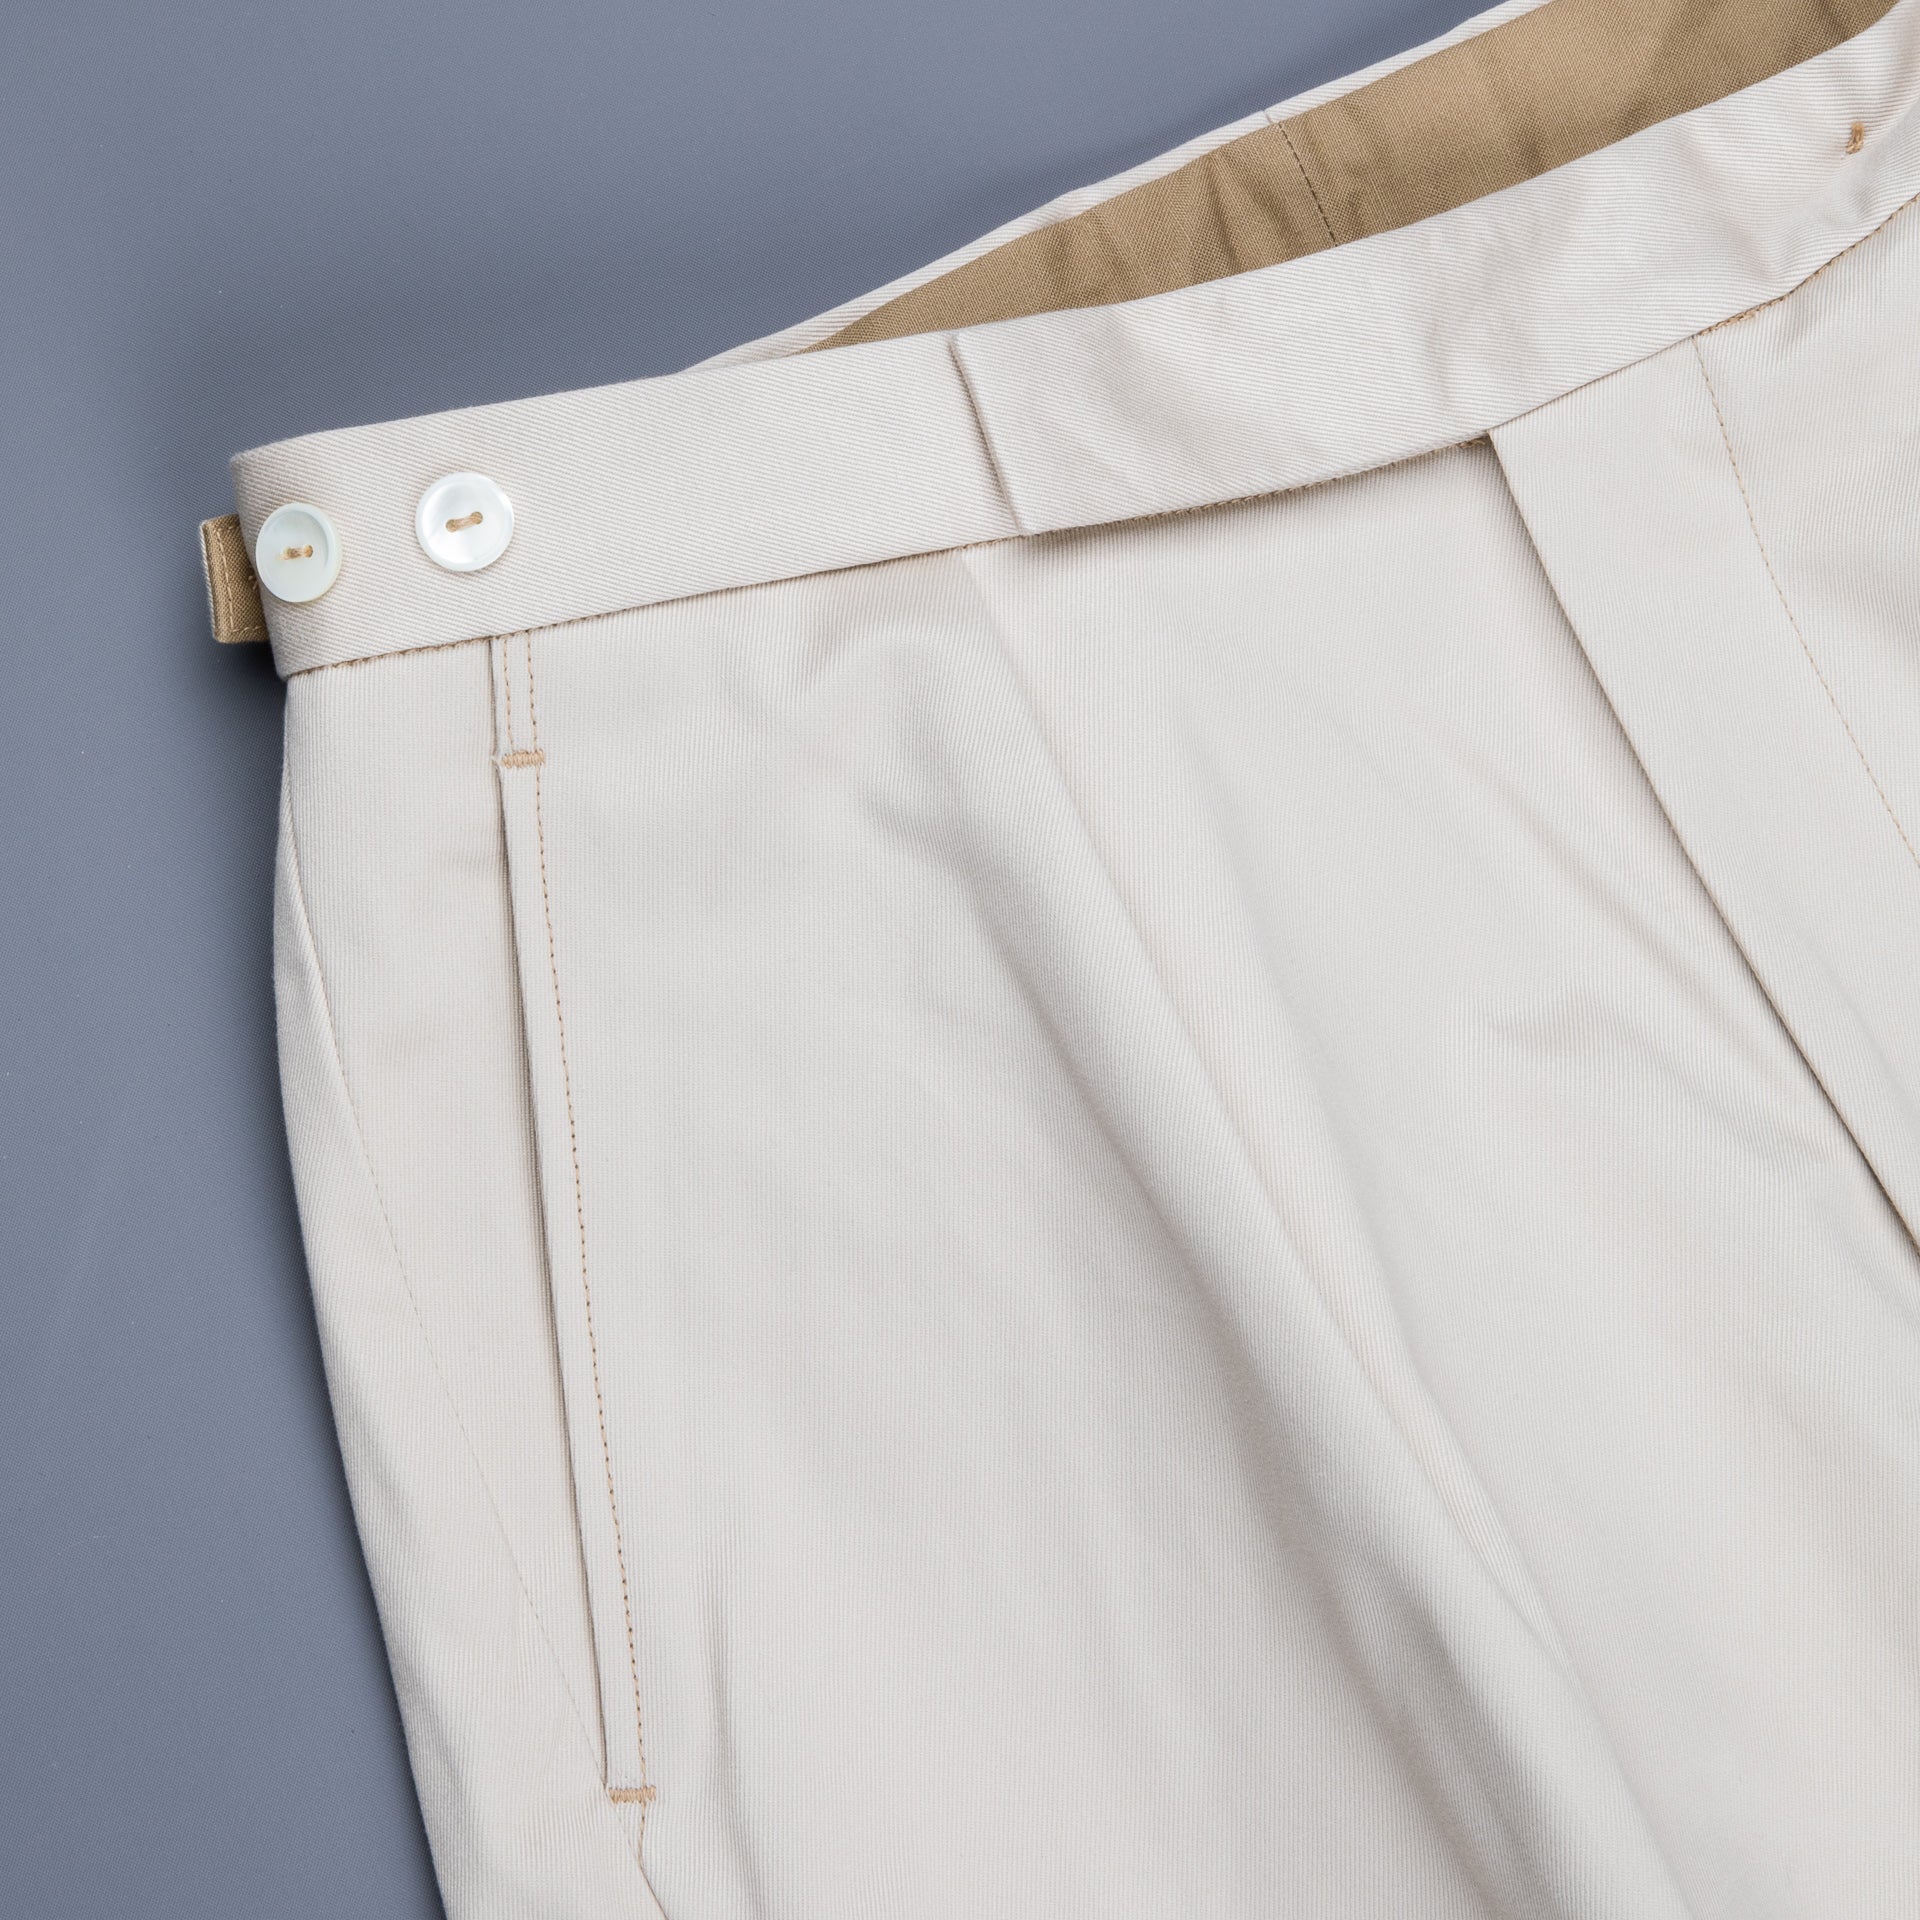 The Real McCoy&#39;s Joe McCoy 1950s Cotton Chino Trousers Beige